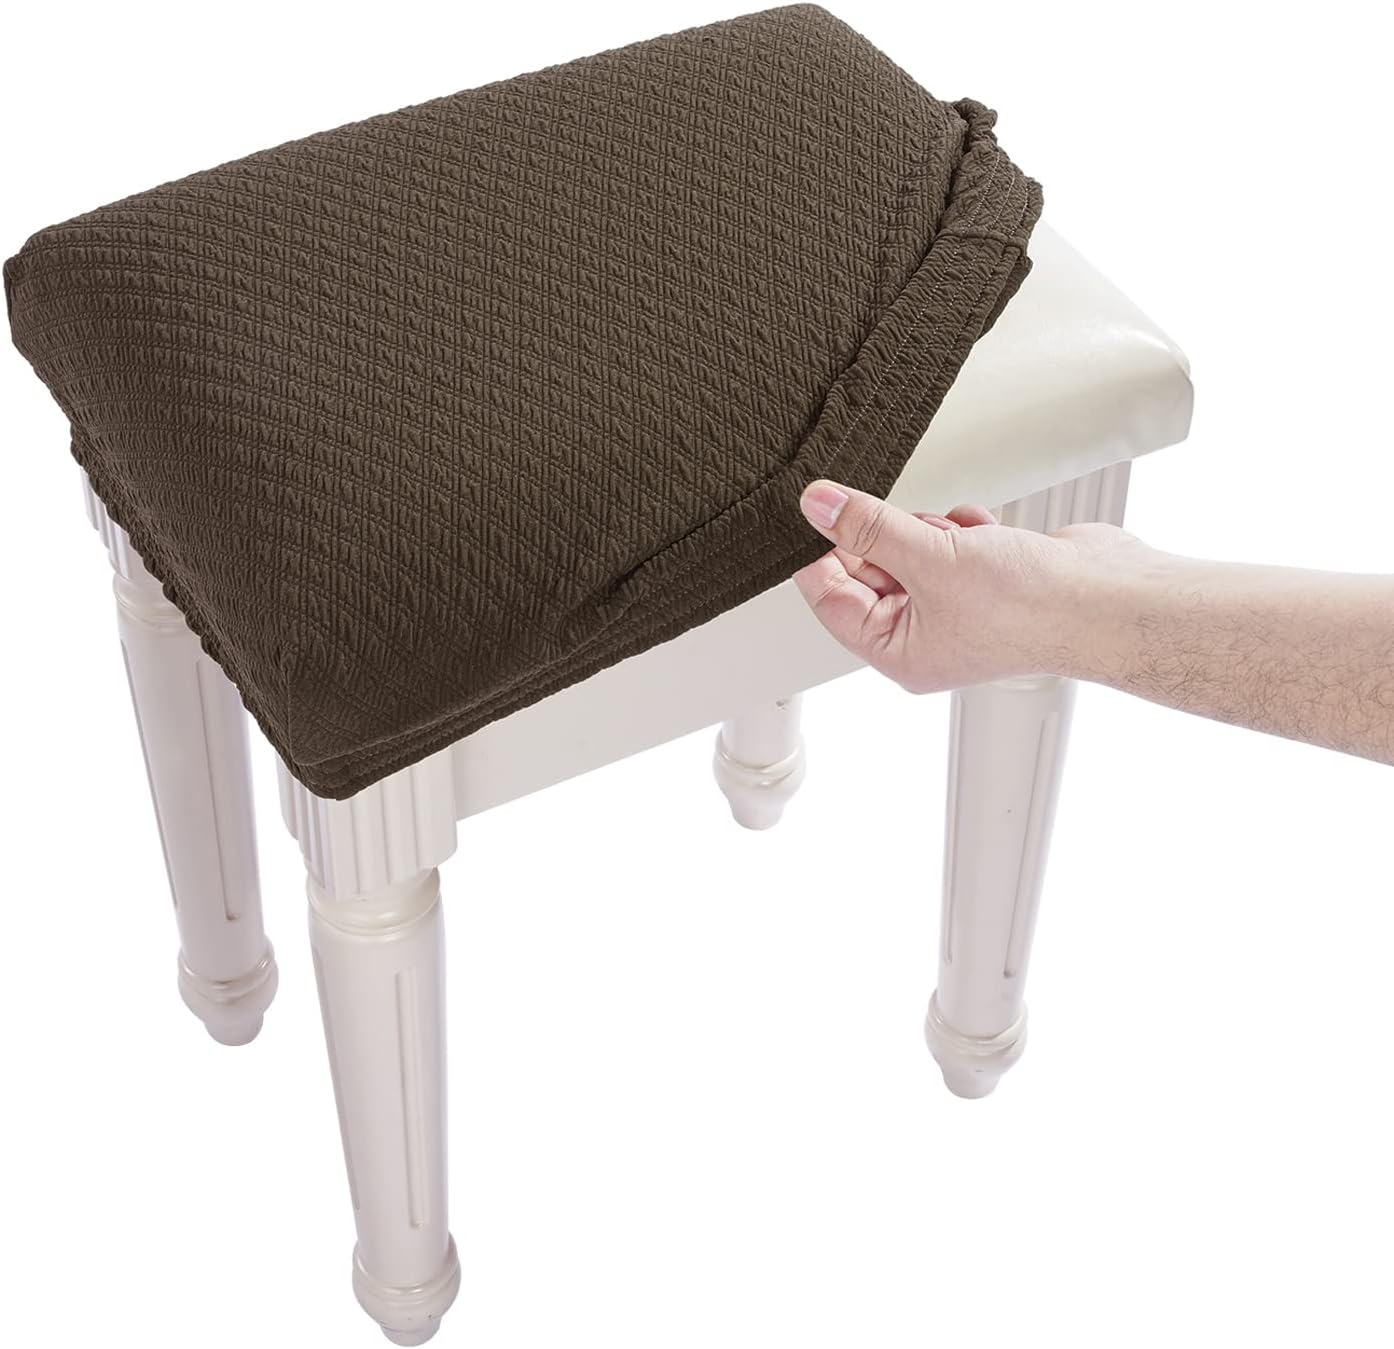 BUYUE Luxury Vanity Bench Stool Cover, (15"- 20") L x (11.8"- 15.7") W Rectangle Small Bench Stretch Jacquard Washable Slipcover (XS, Brown)